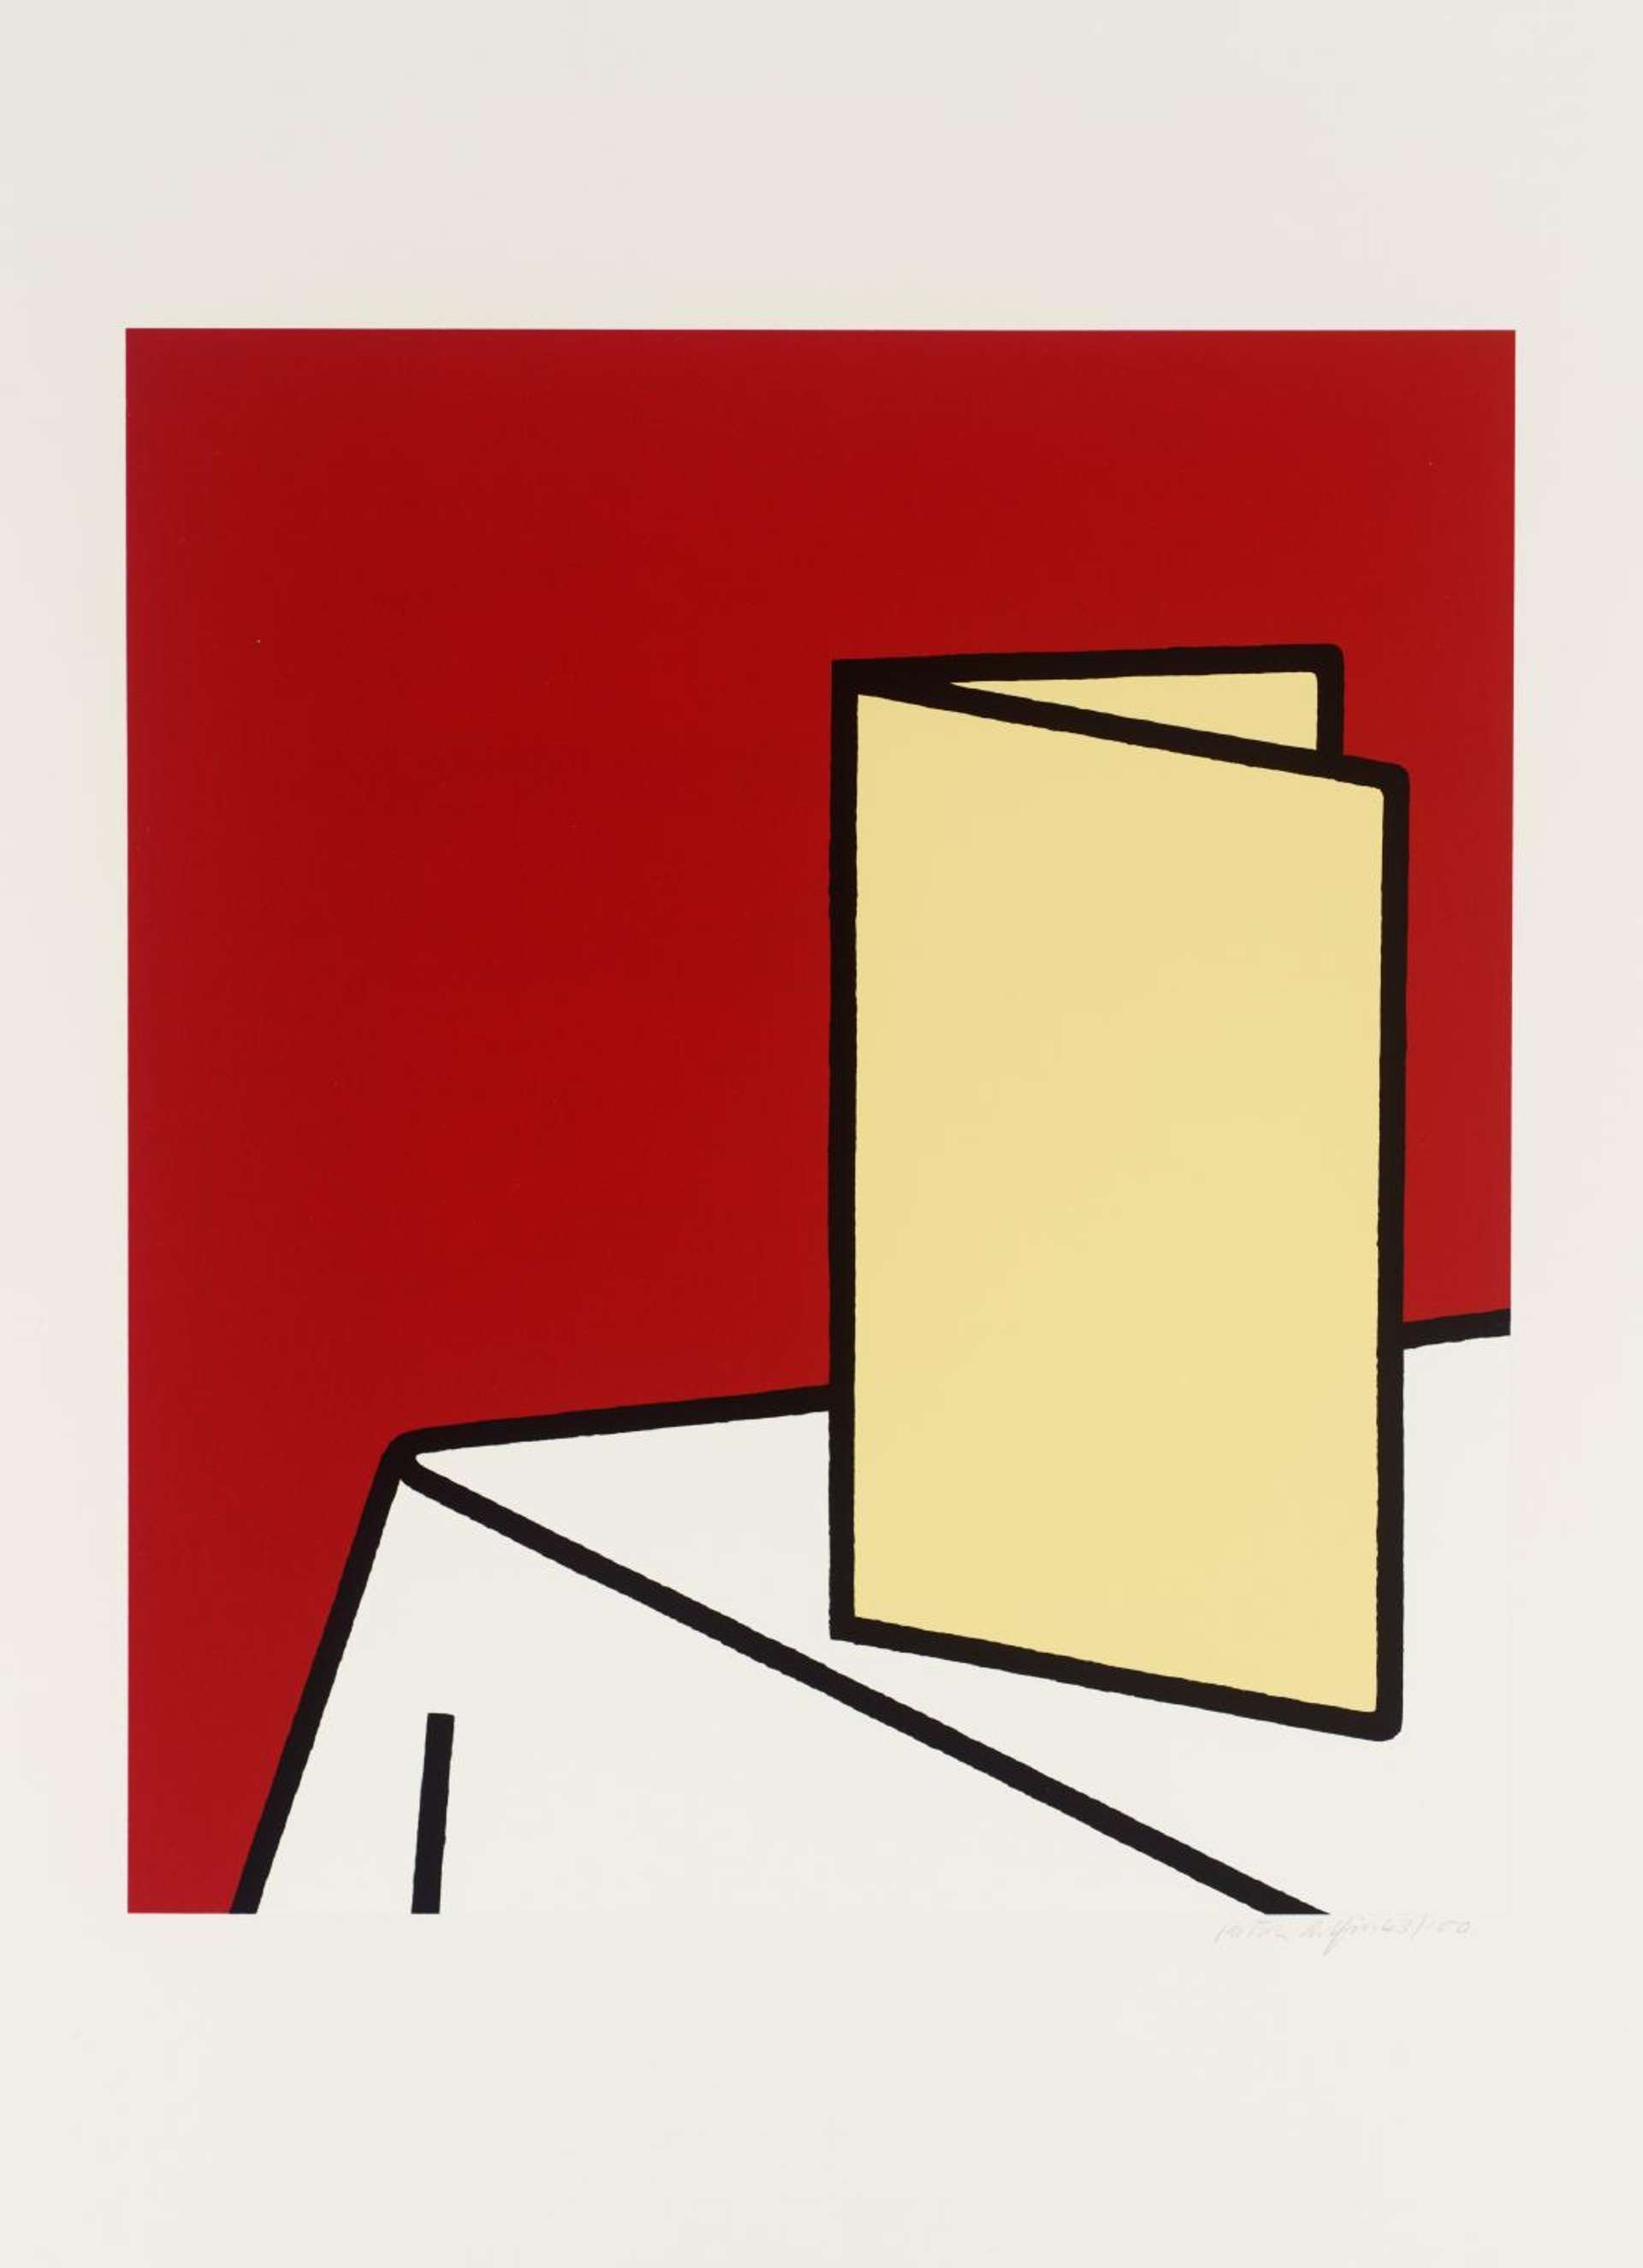 A printed image by the artist Patrick Caulfield, which shows a white tablecloth and table corner, on which rests a pale yellow menu, against a red background.]